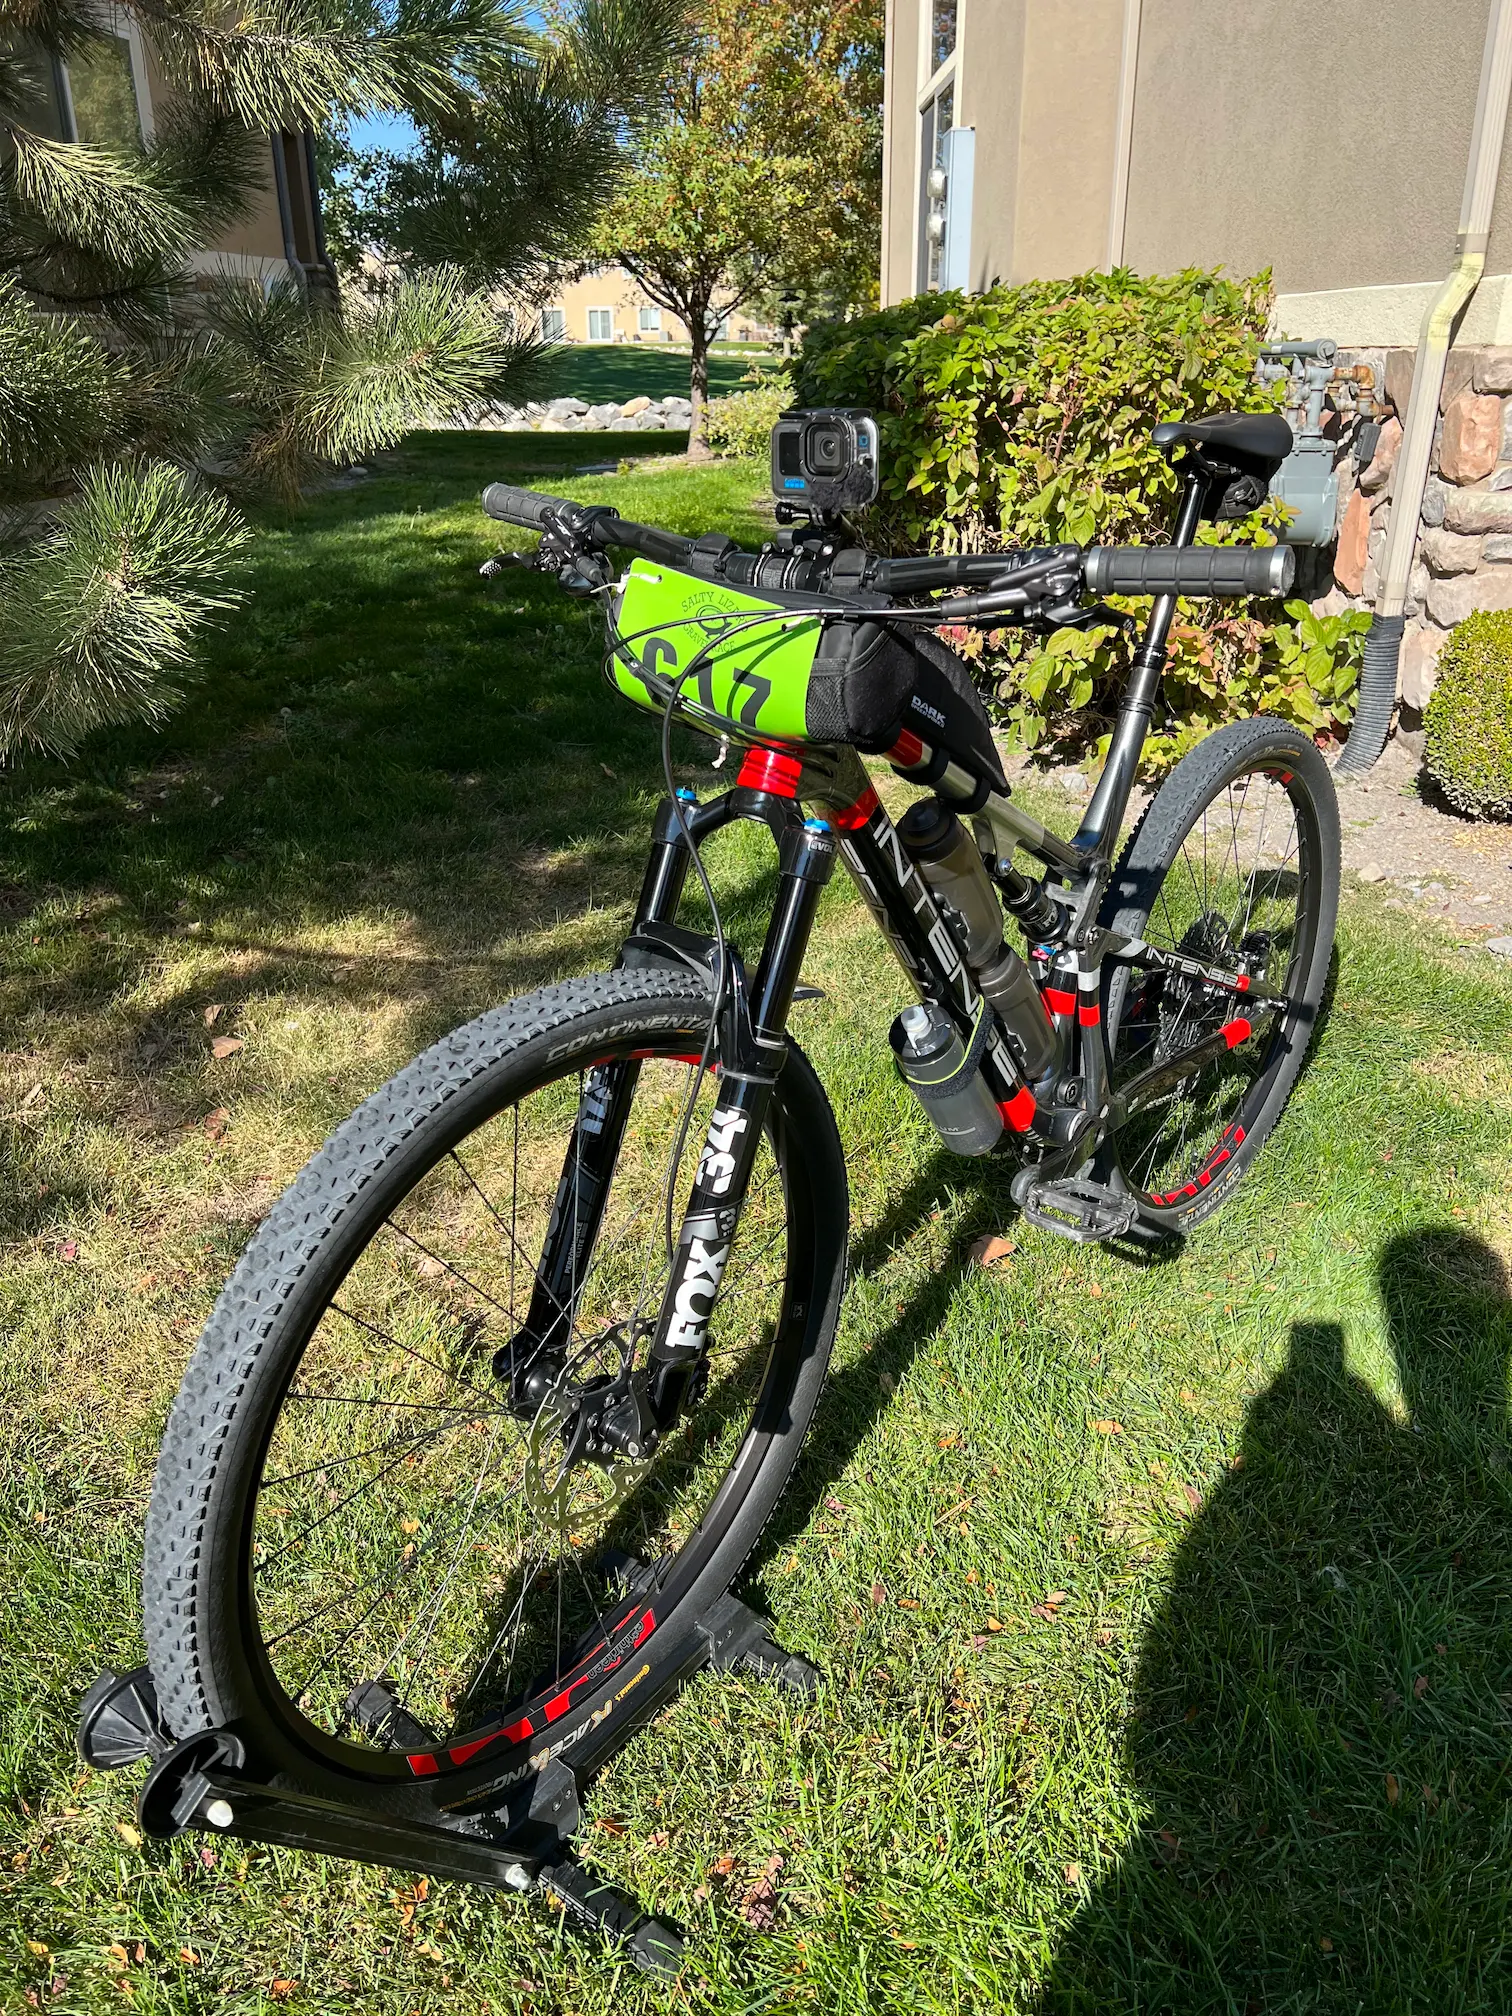 Keith's bike is prepped and ready for the Salty Lizard 100 gravel race.